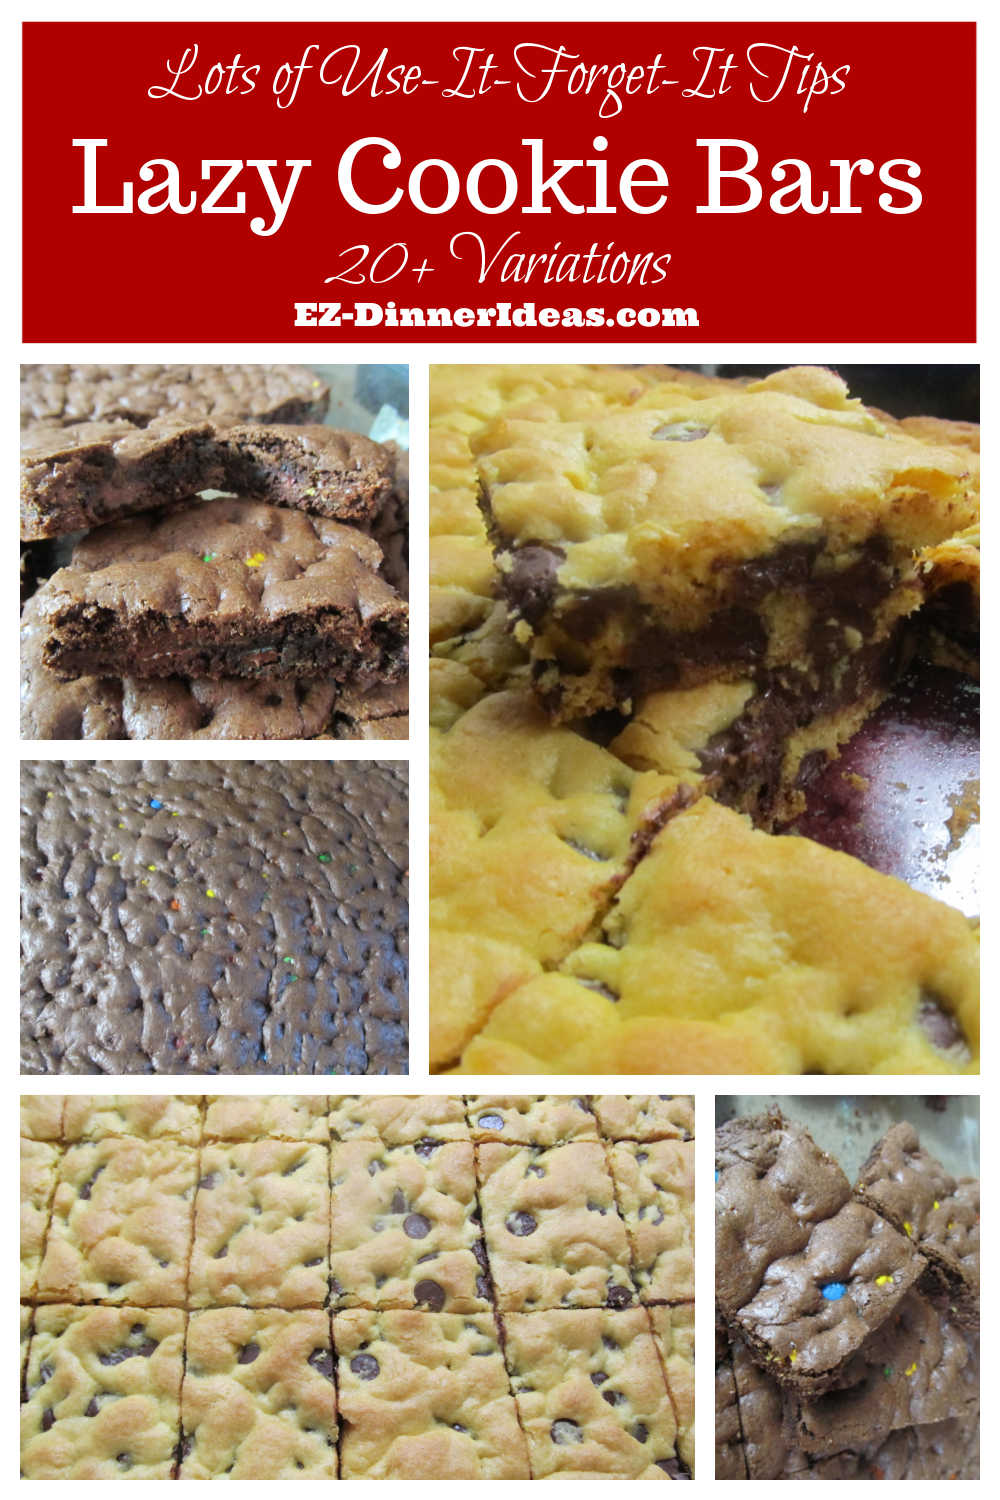 Cake Mix Bar Cookies | The Famous Lazy Cookie Bars